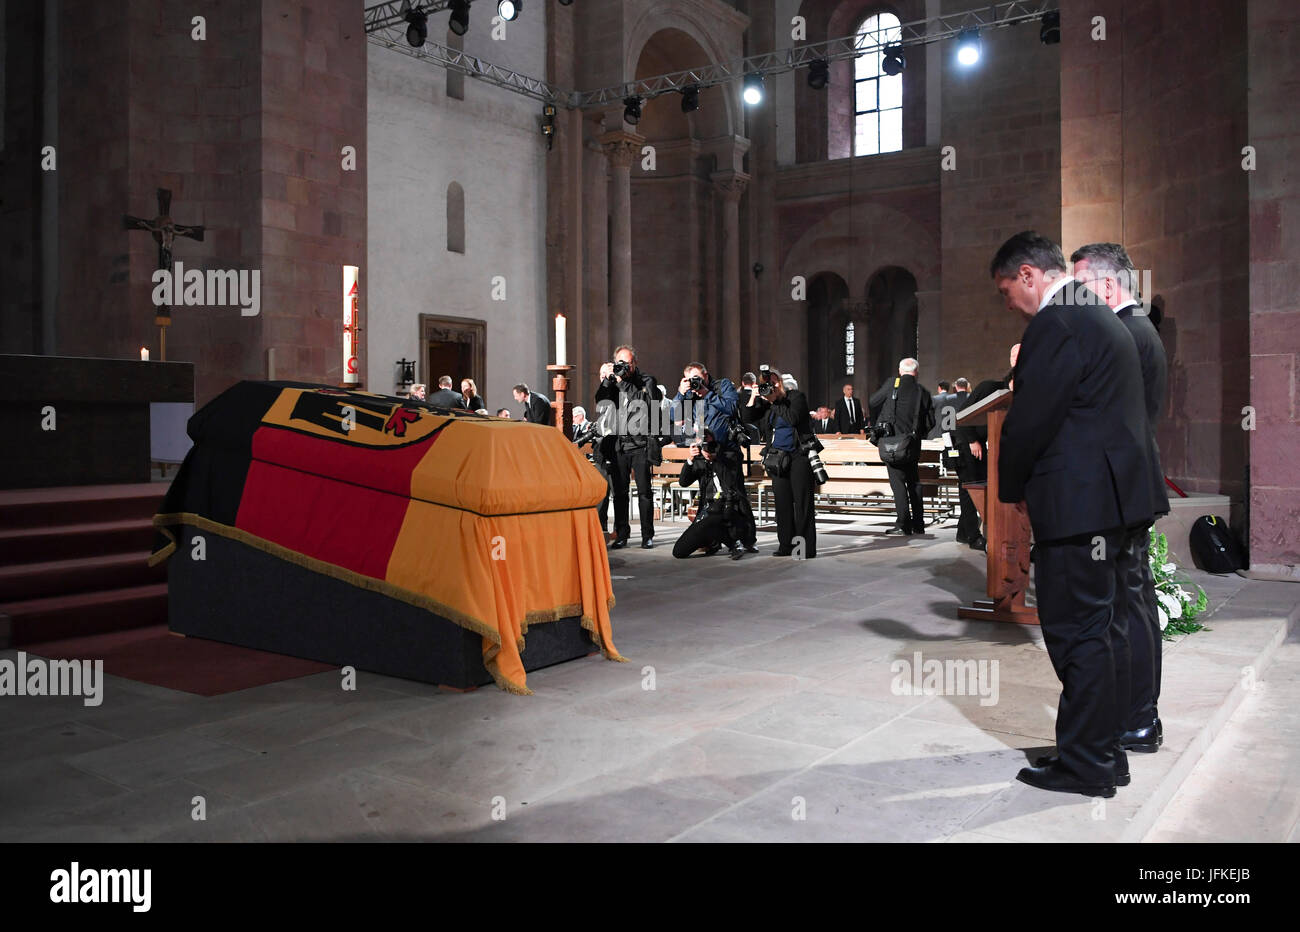 Speyer, Germany. 1st July, 2017. Federal minister of the interior Thomas de Maiziere (L) and minister of foreign affairs Sigmar Gabriel partake in the pontifical requiem for the deceased former German chancellor Helmut Kohl at the cathedral in Speyer, Germany, 1 July 2017. Kohl died on 16 June 2017 in the age of 87. The chancellor of the German unity held office for 16 years. Photo: Arne Dedert/dpa-Pool/dpa/Alamy Live News Stock Photo